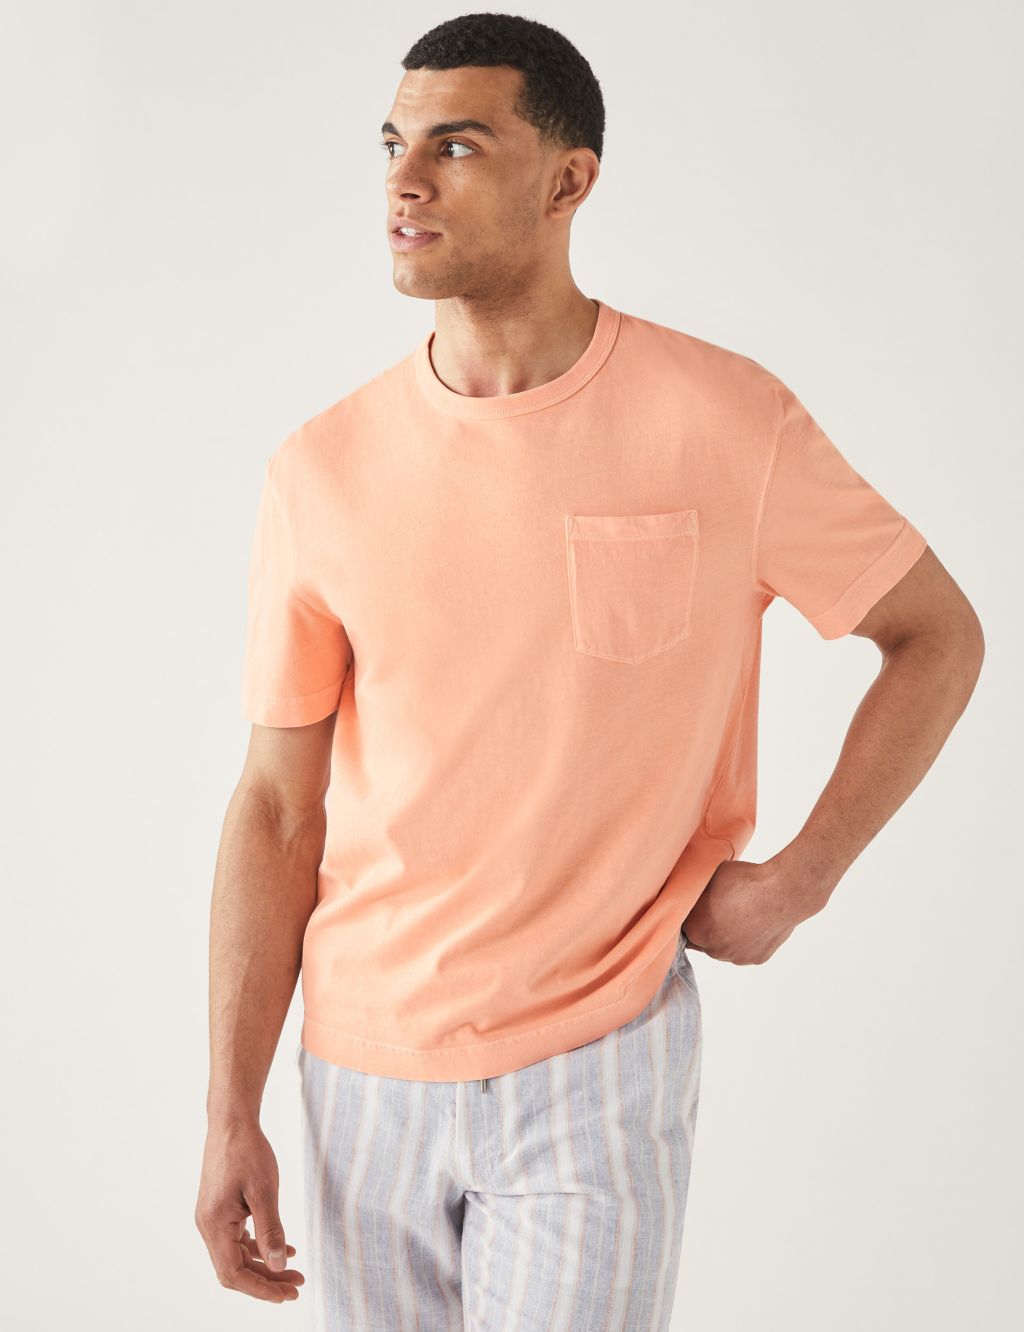 Relaxed Fit Pure Cotton Crew Neck T-Shirt image 3